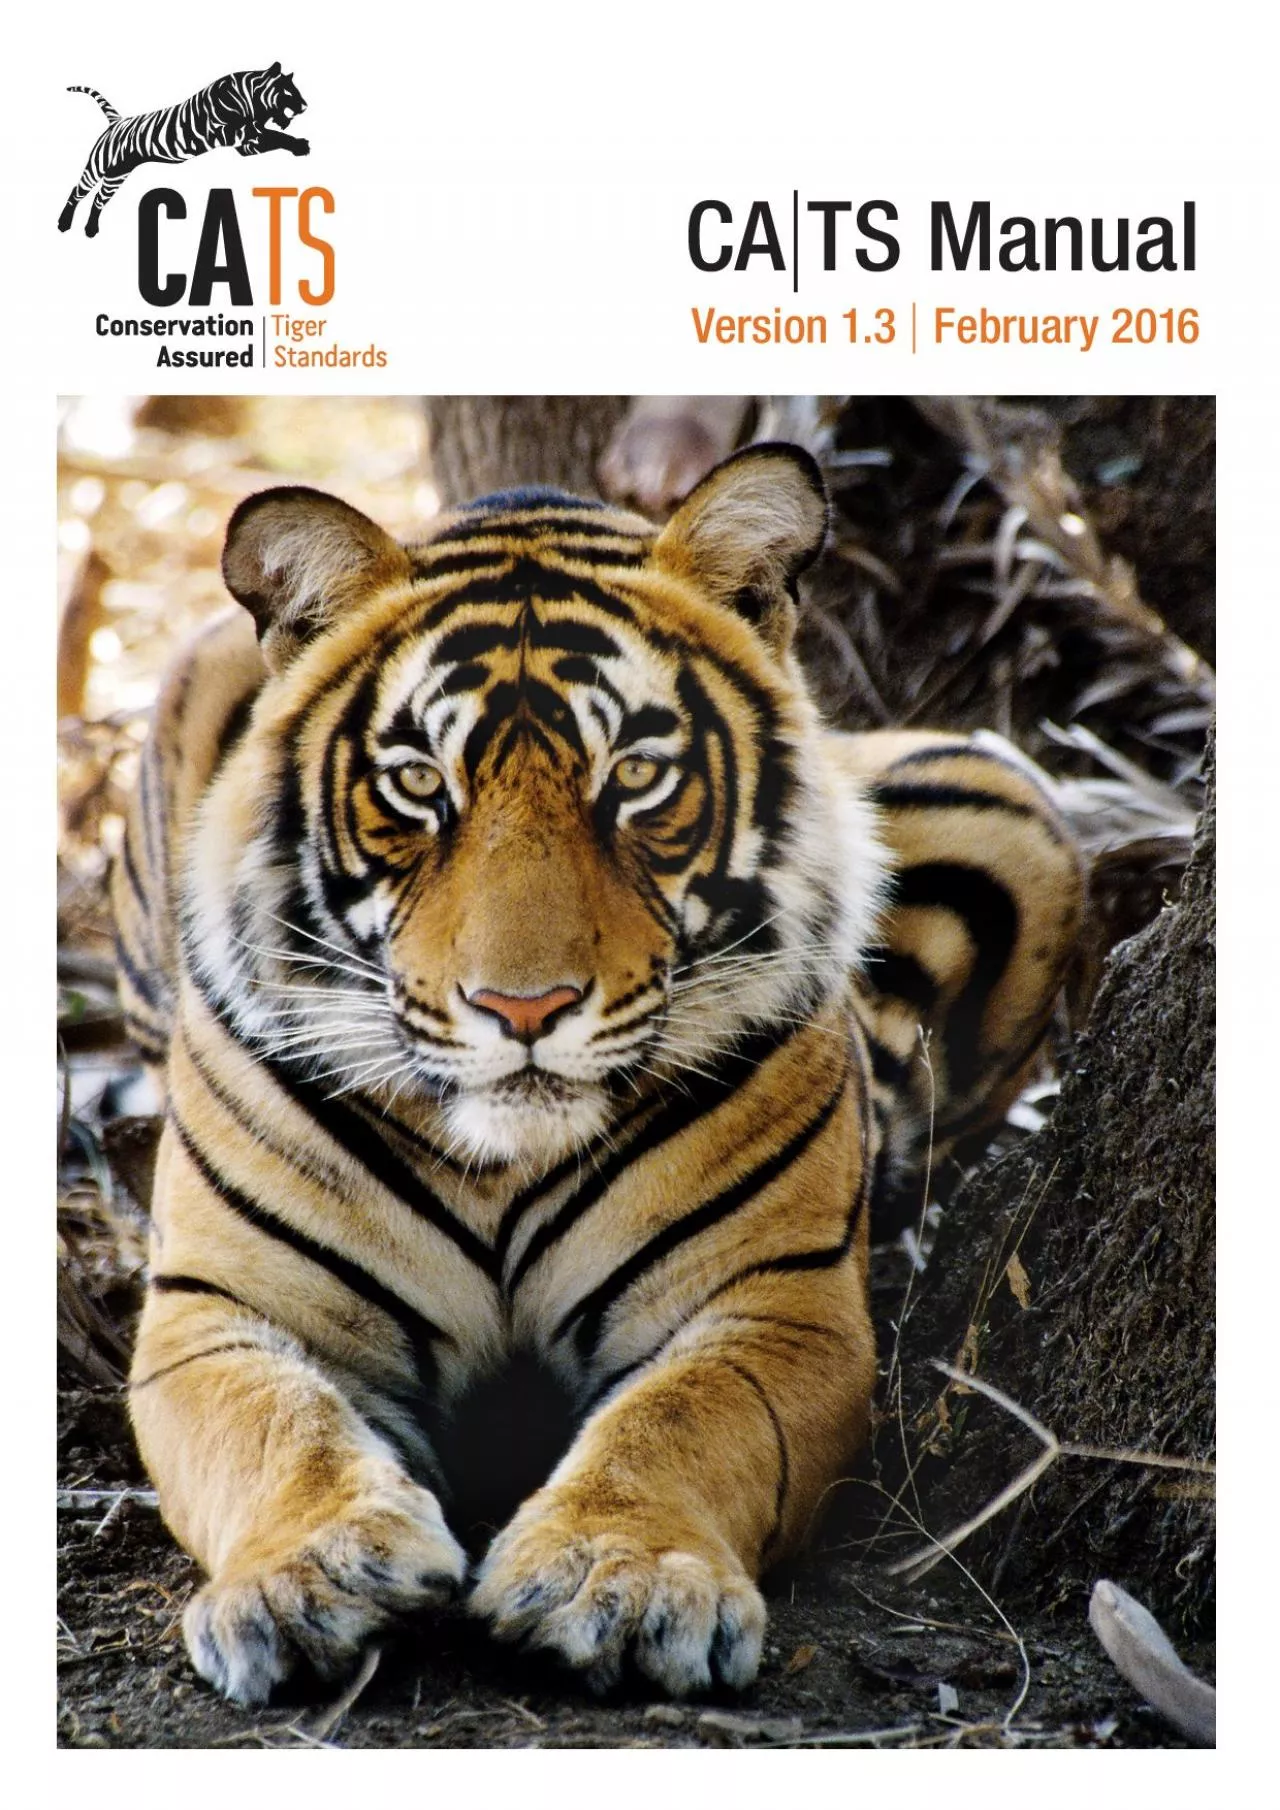 Why do we need standards to secure tiger numbers